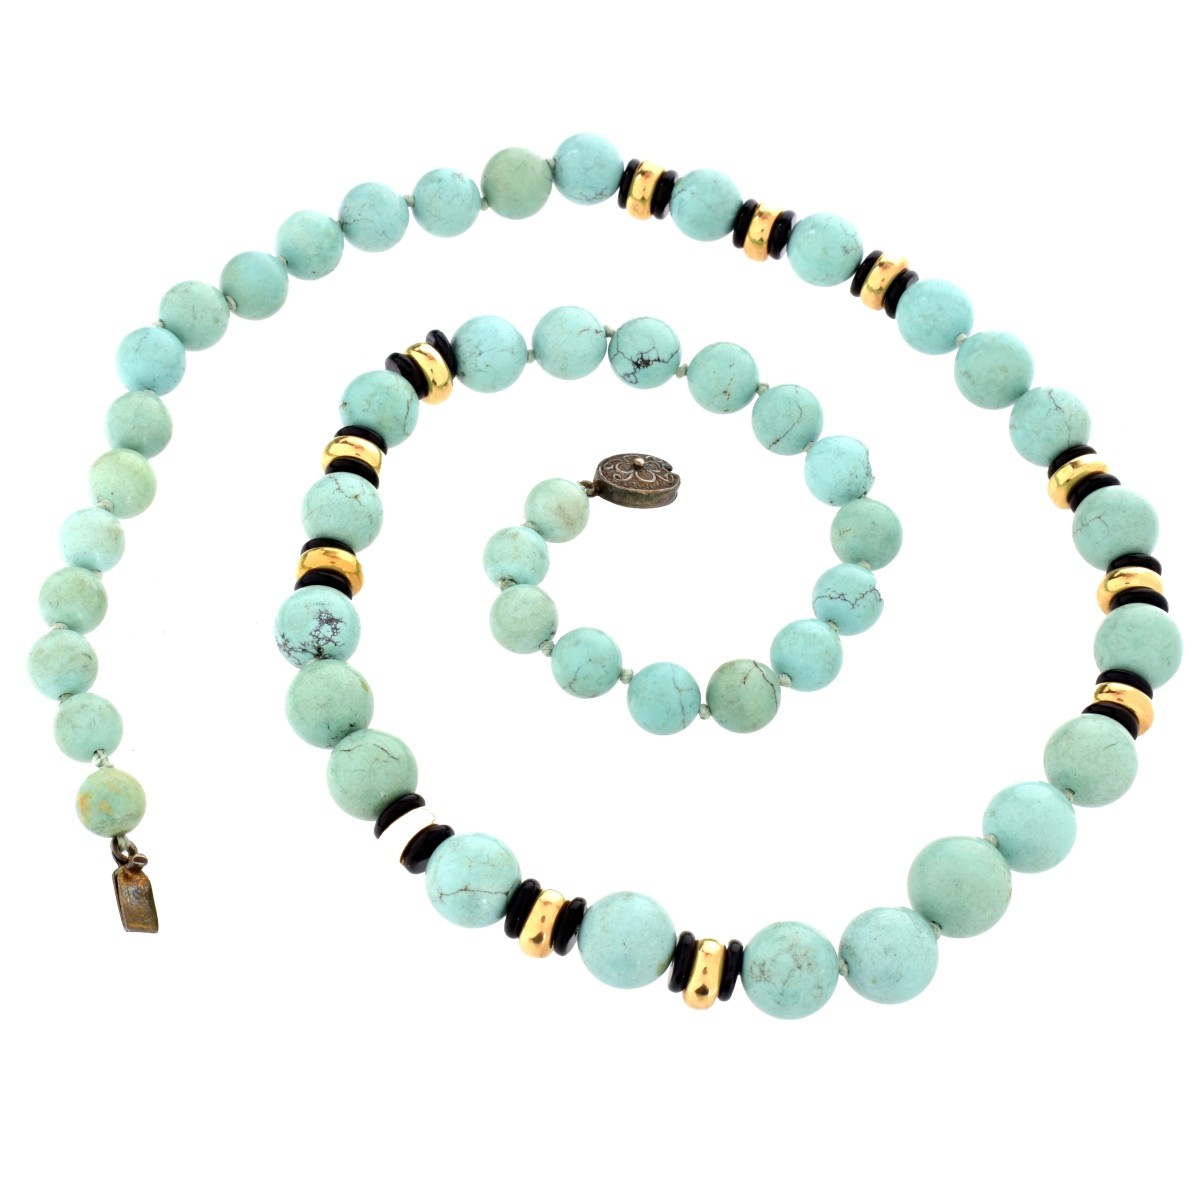 Vintage Turquoise and Black Onyx Necklace